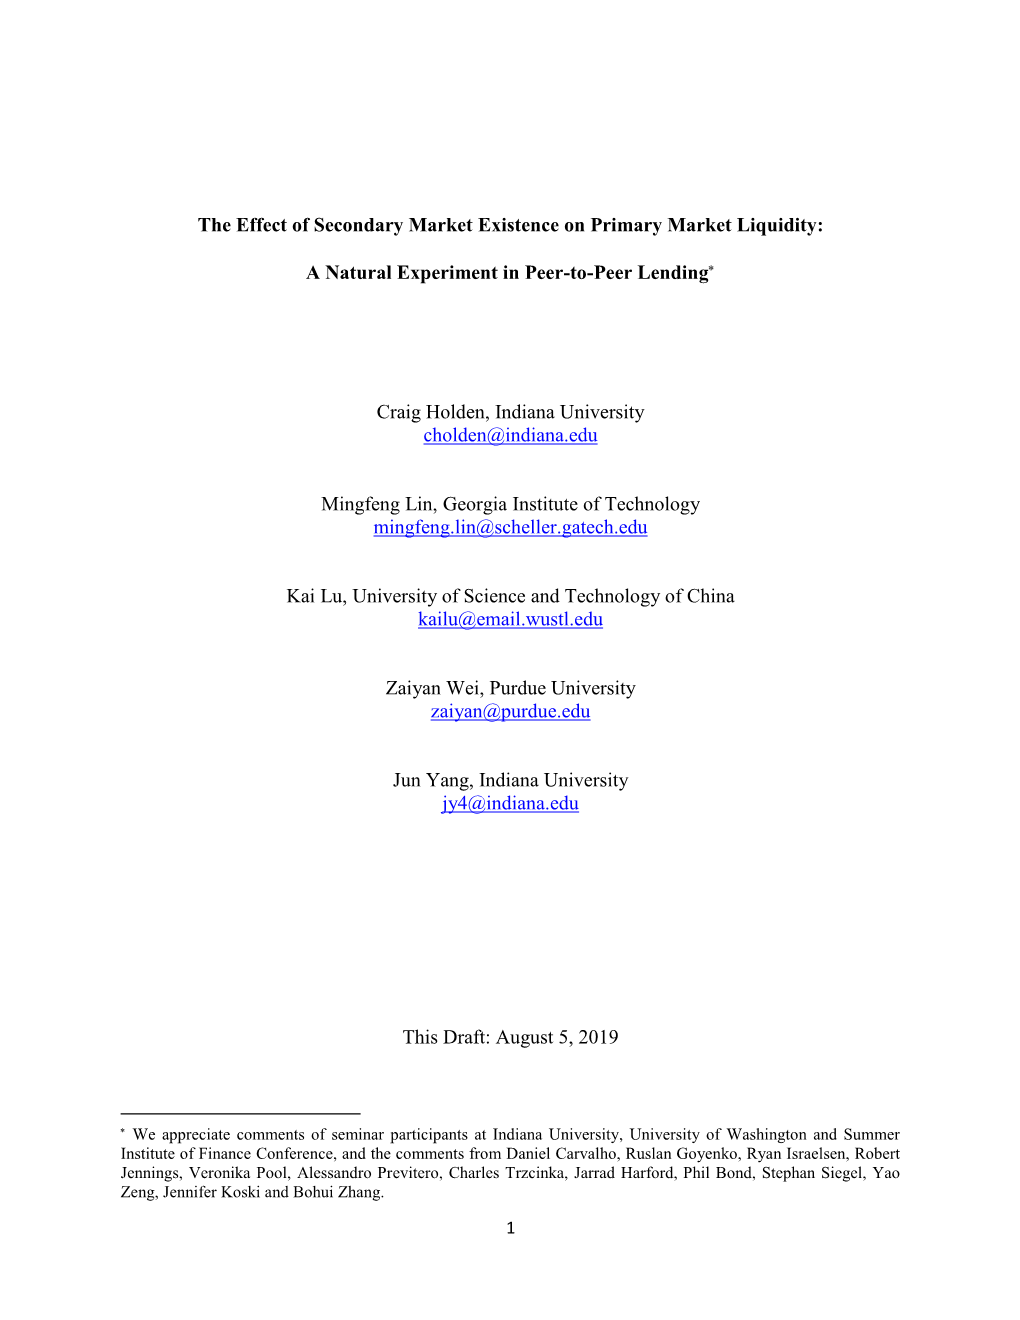 The Effect of Secondary Market Existence on Primary Market Liquidity